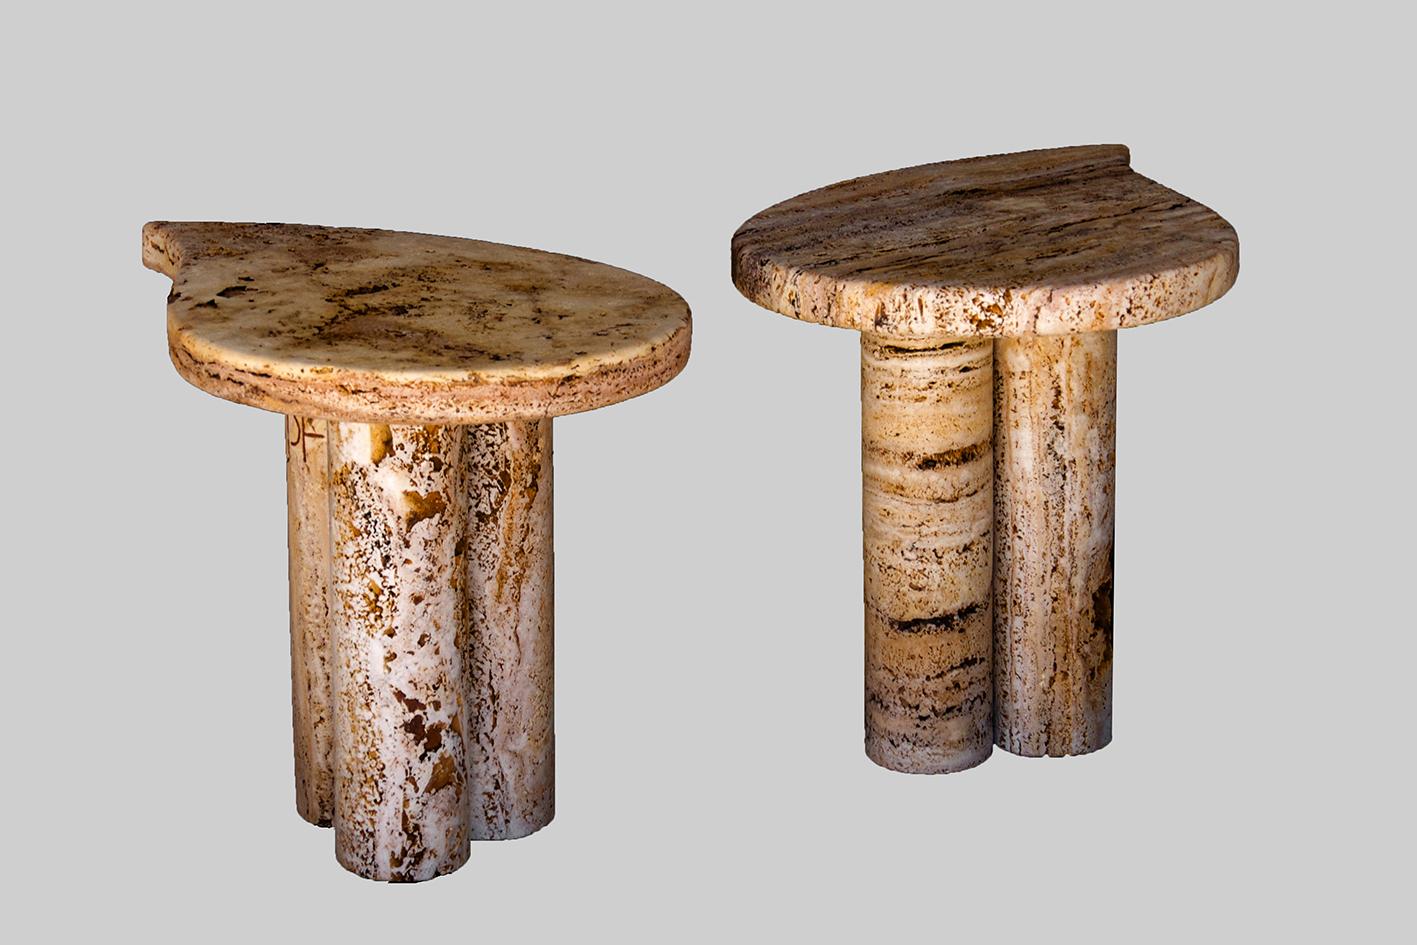 Pair of travetin tables with drop top and three cylindrical feet.
Signed by the artist.
Perfect condition.